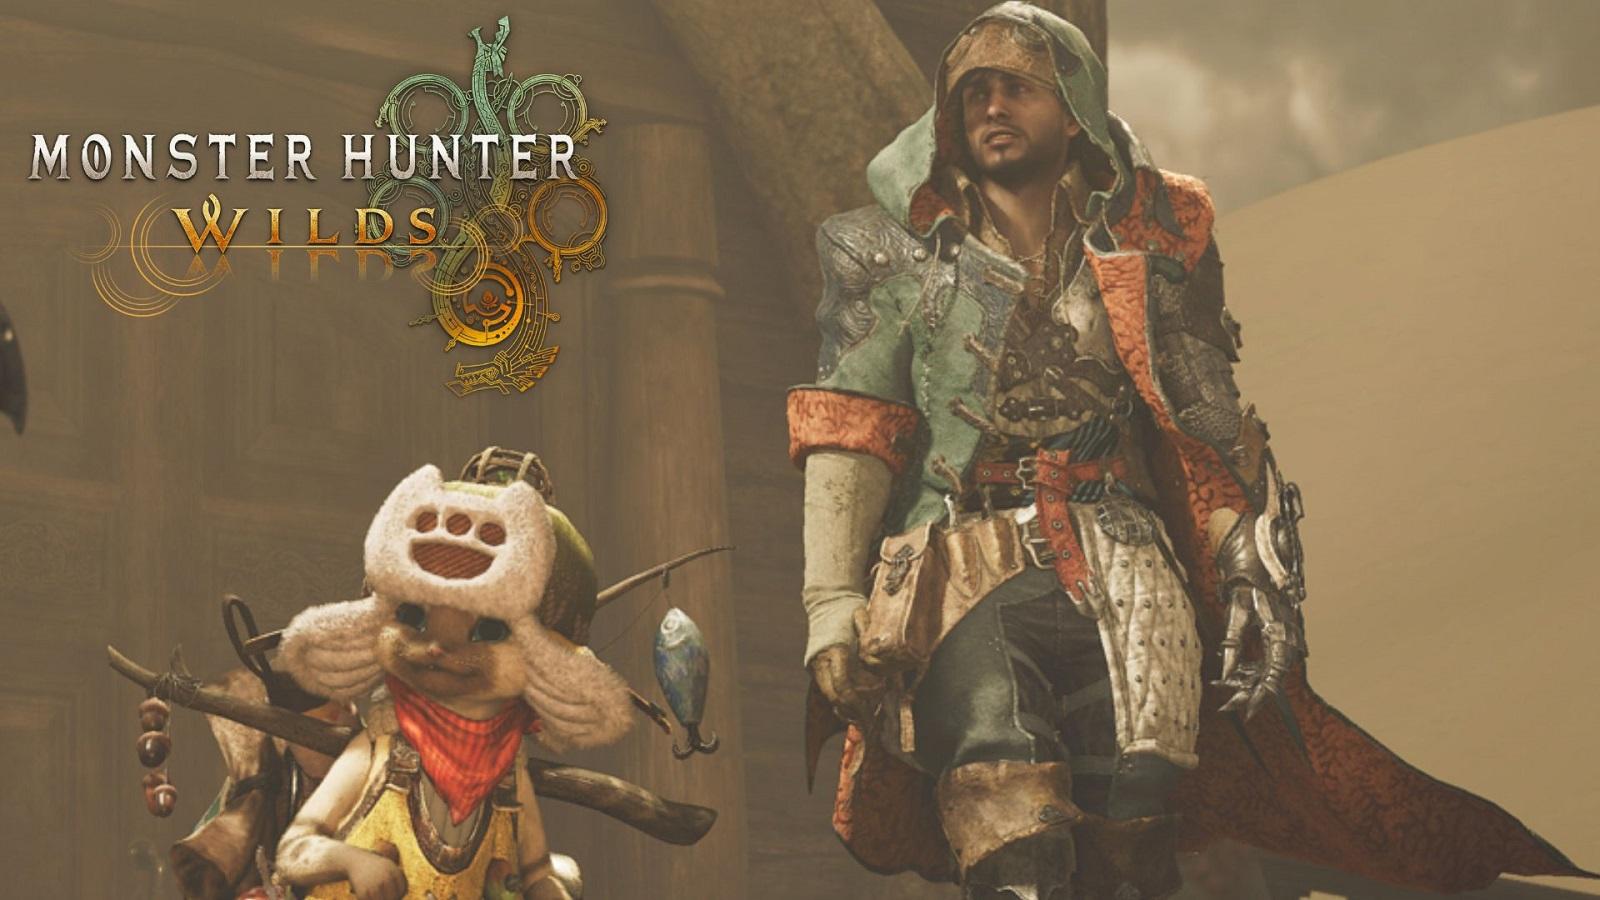 Monster Hunter Wilds hunter with Palico